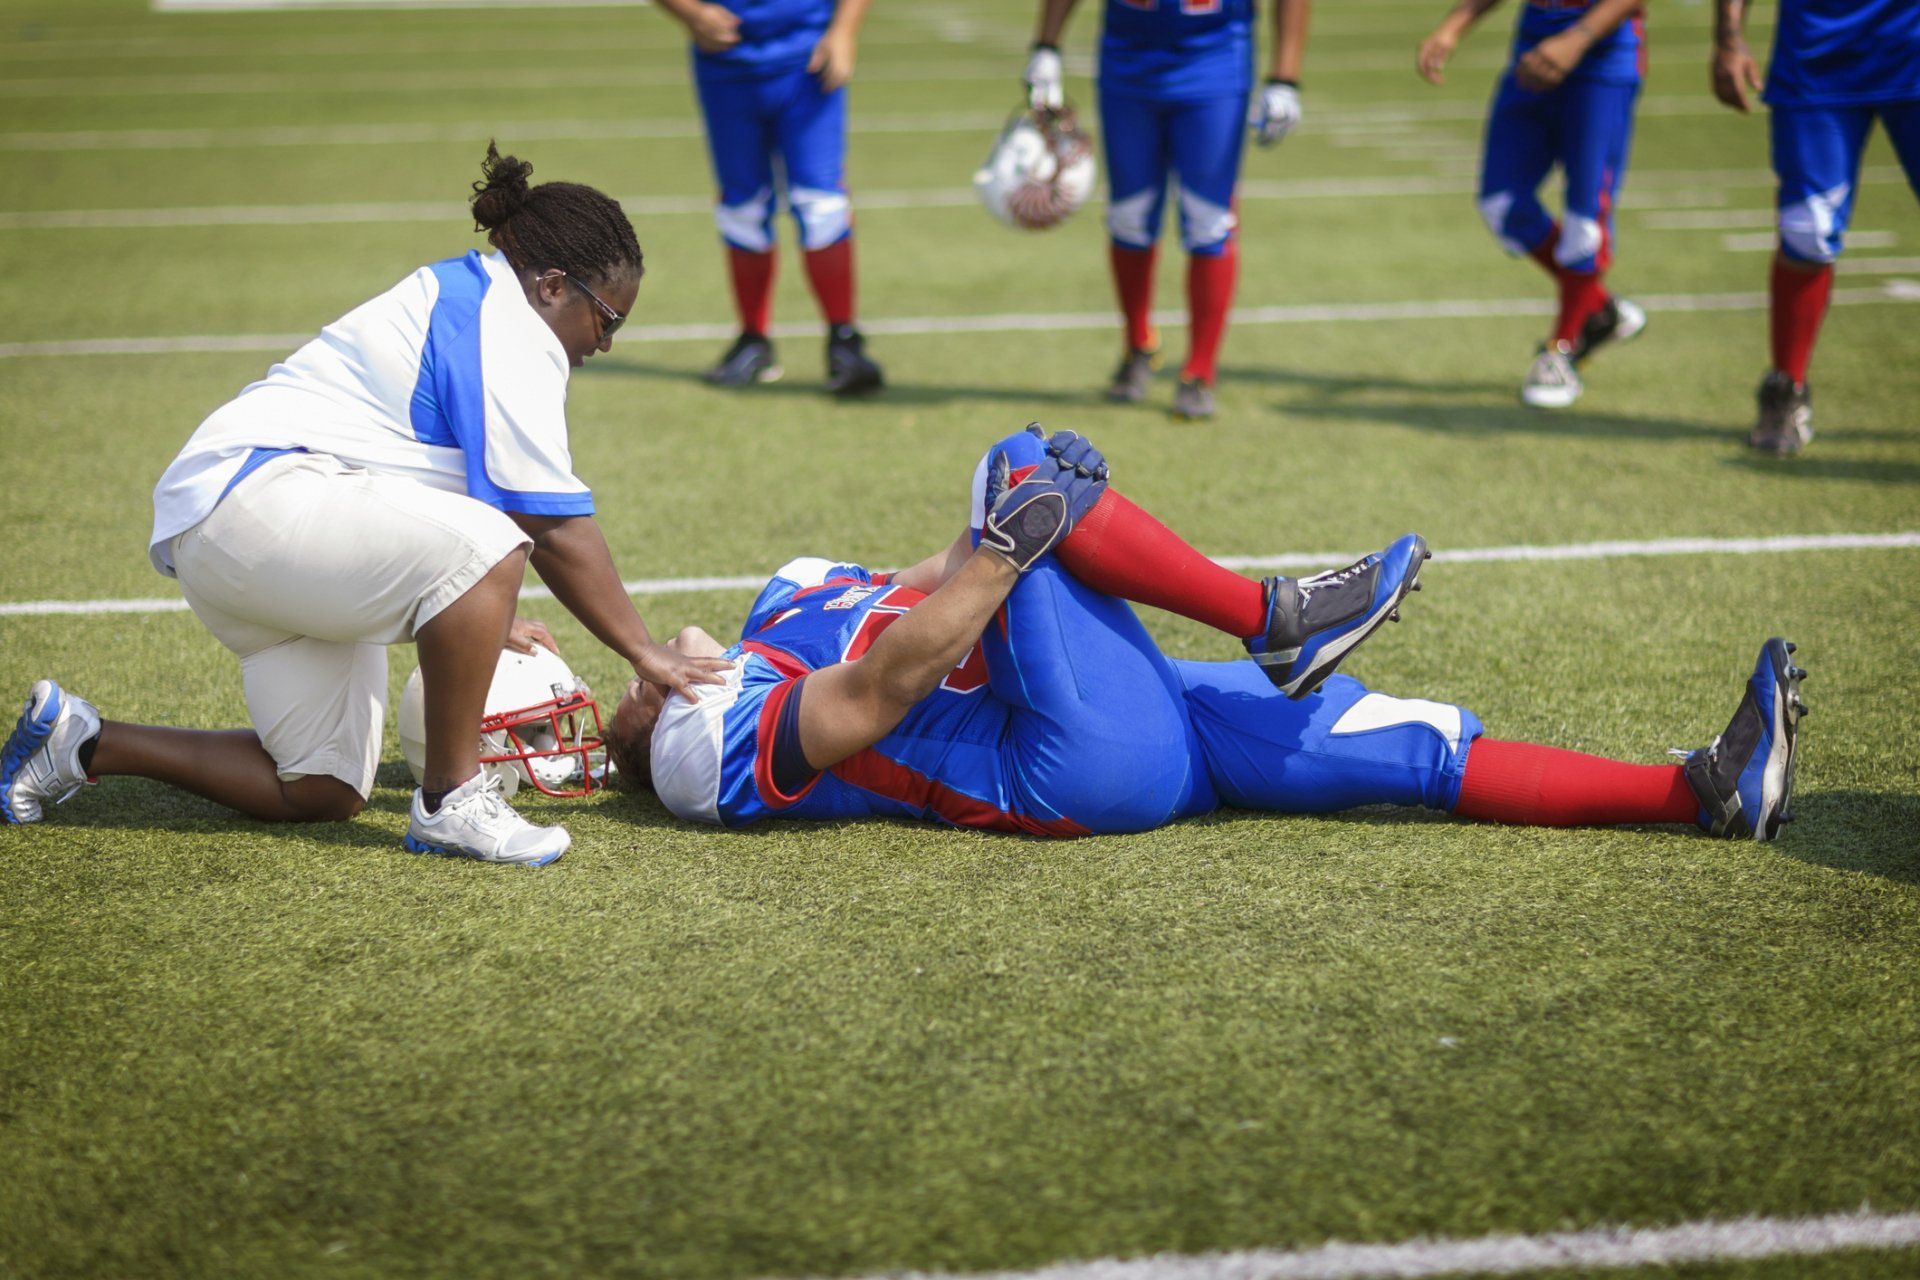 Football player having a knee injury | Colorado Springs, CO | The Partridge Family Practice